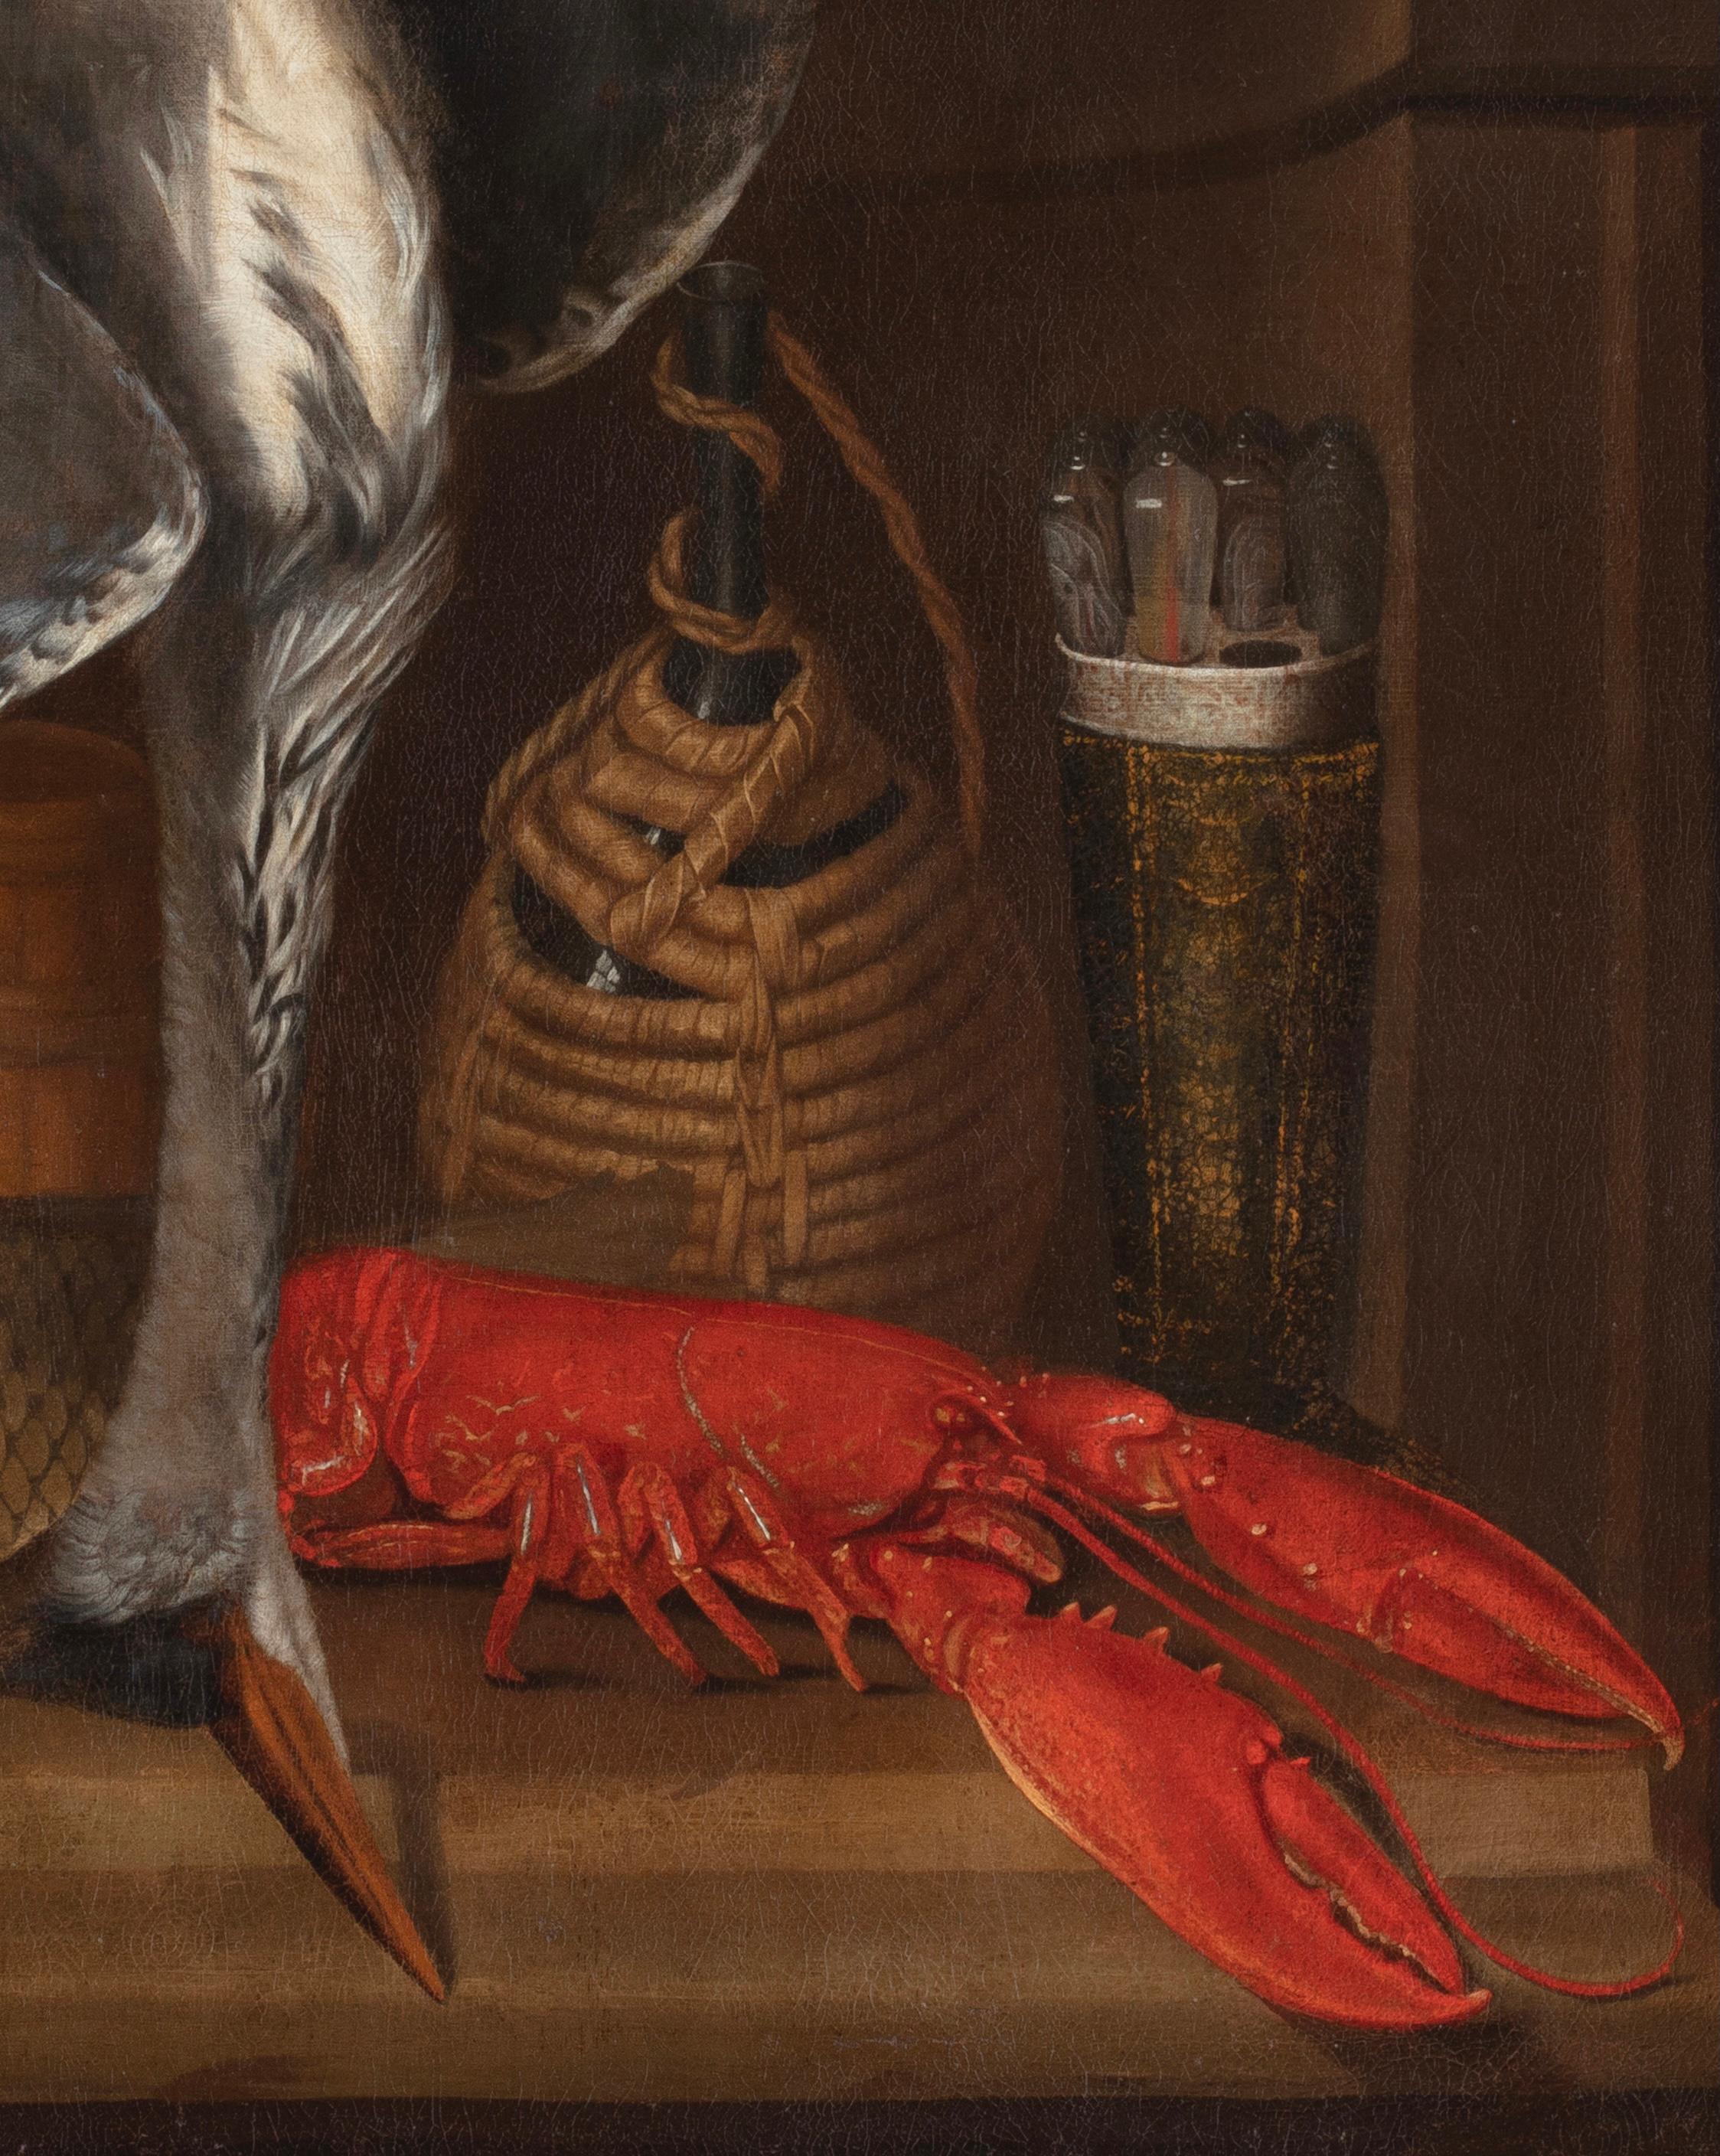 17th century By Dutch maestro Still life with bird, carp & lobster Oil on canvas - Old Masters Painting by 17th-century Dutch maestro